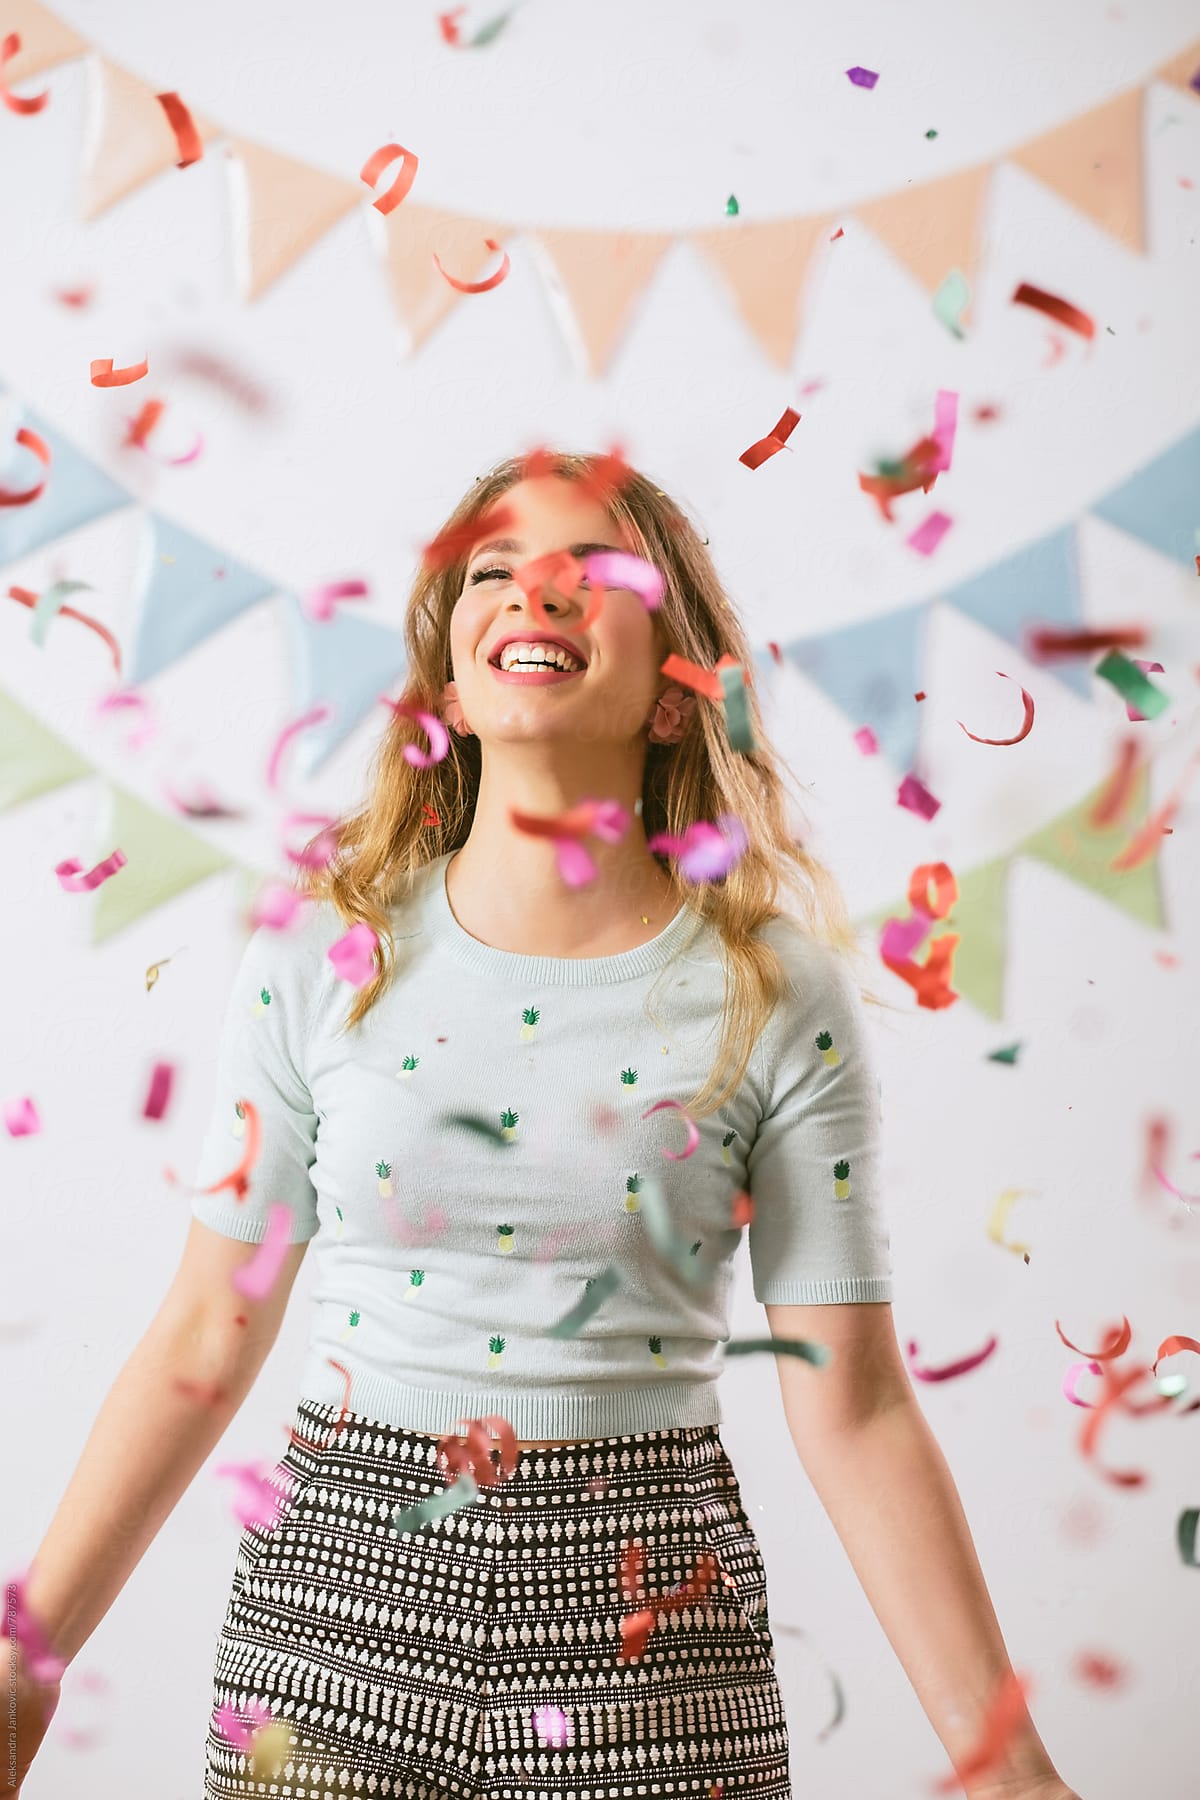 Smiling Caucasian Young Woman At The Party With Confetti